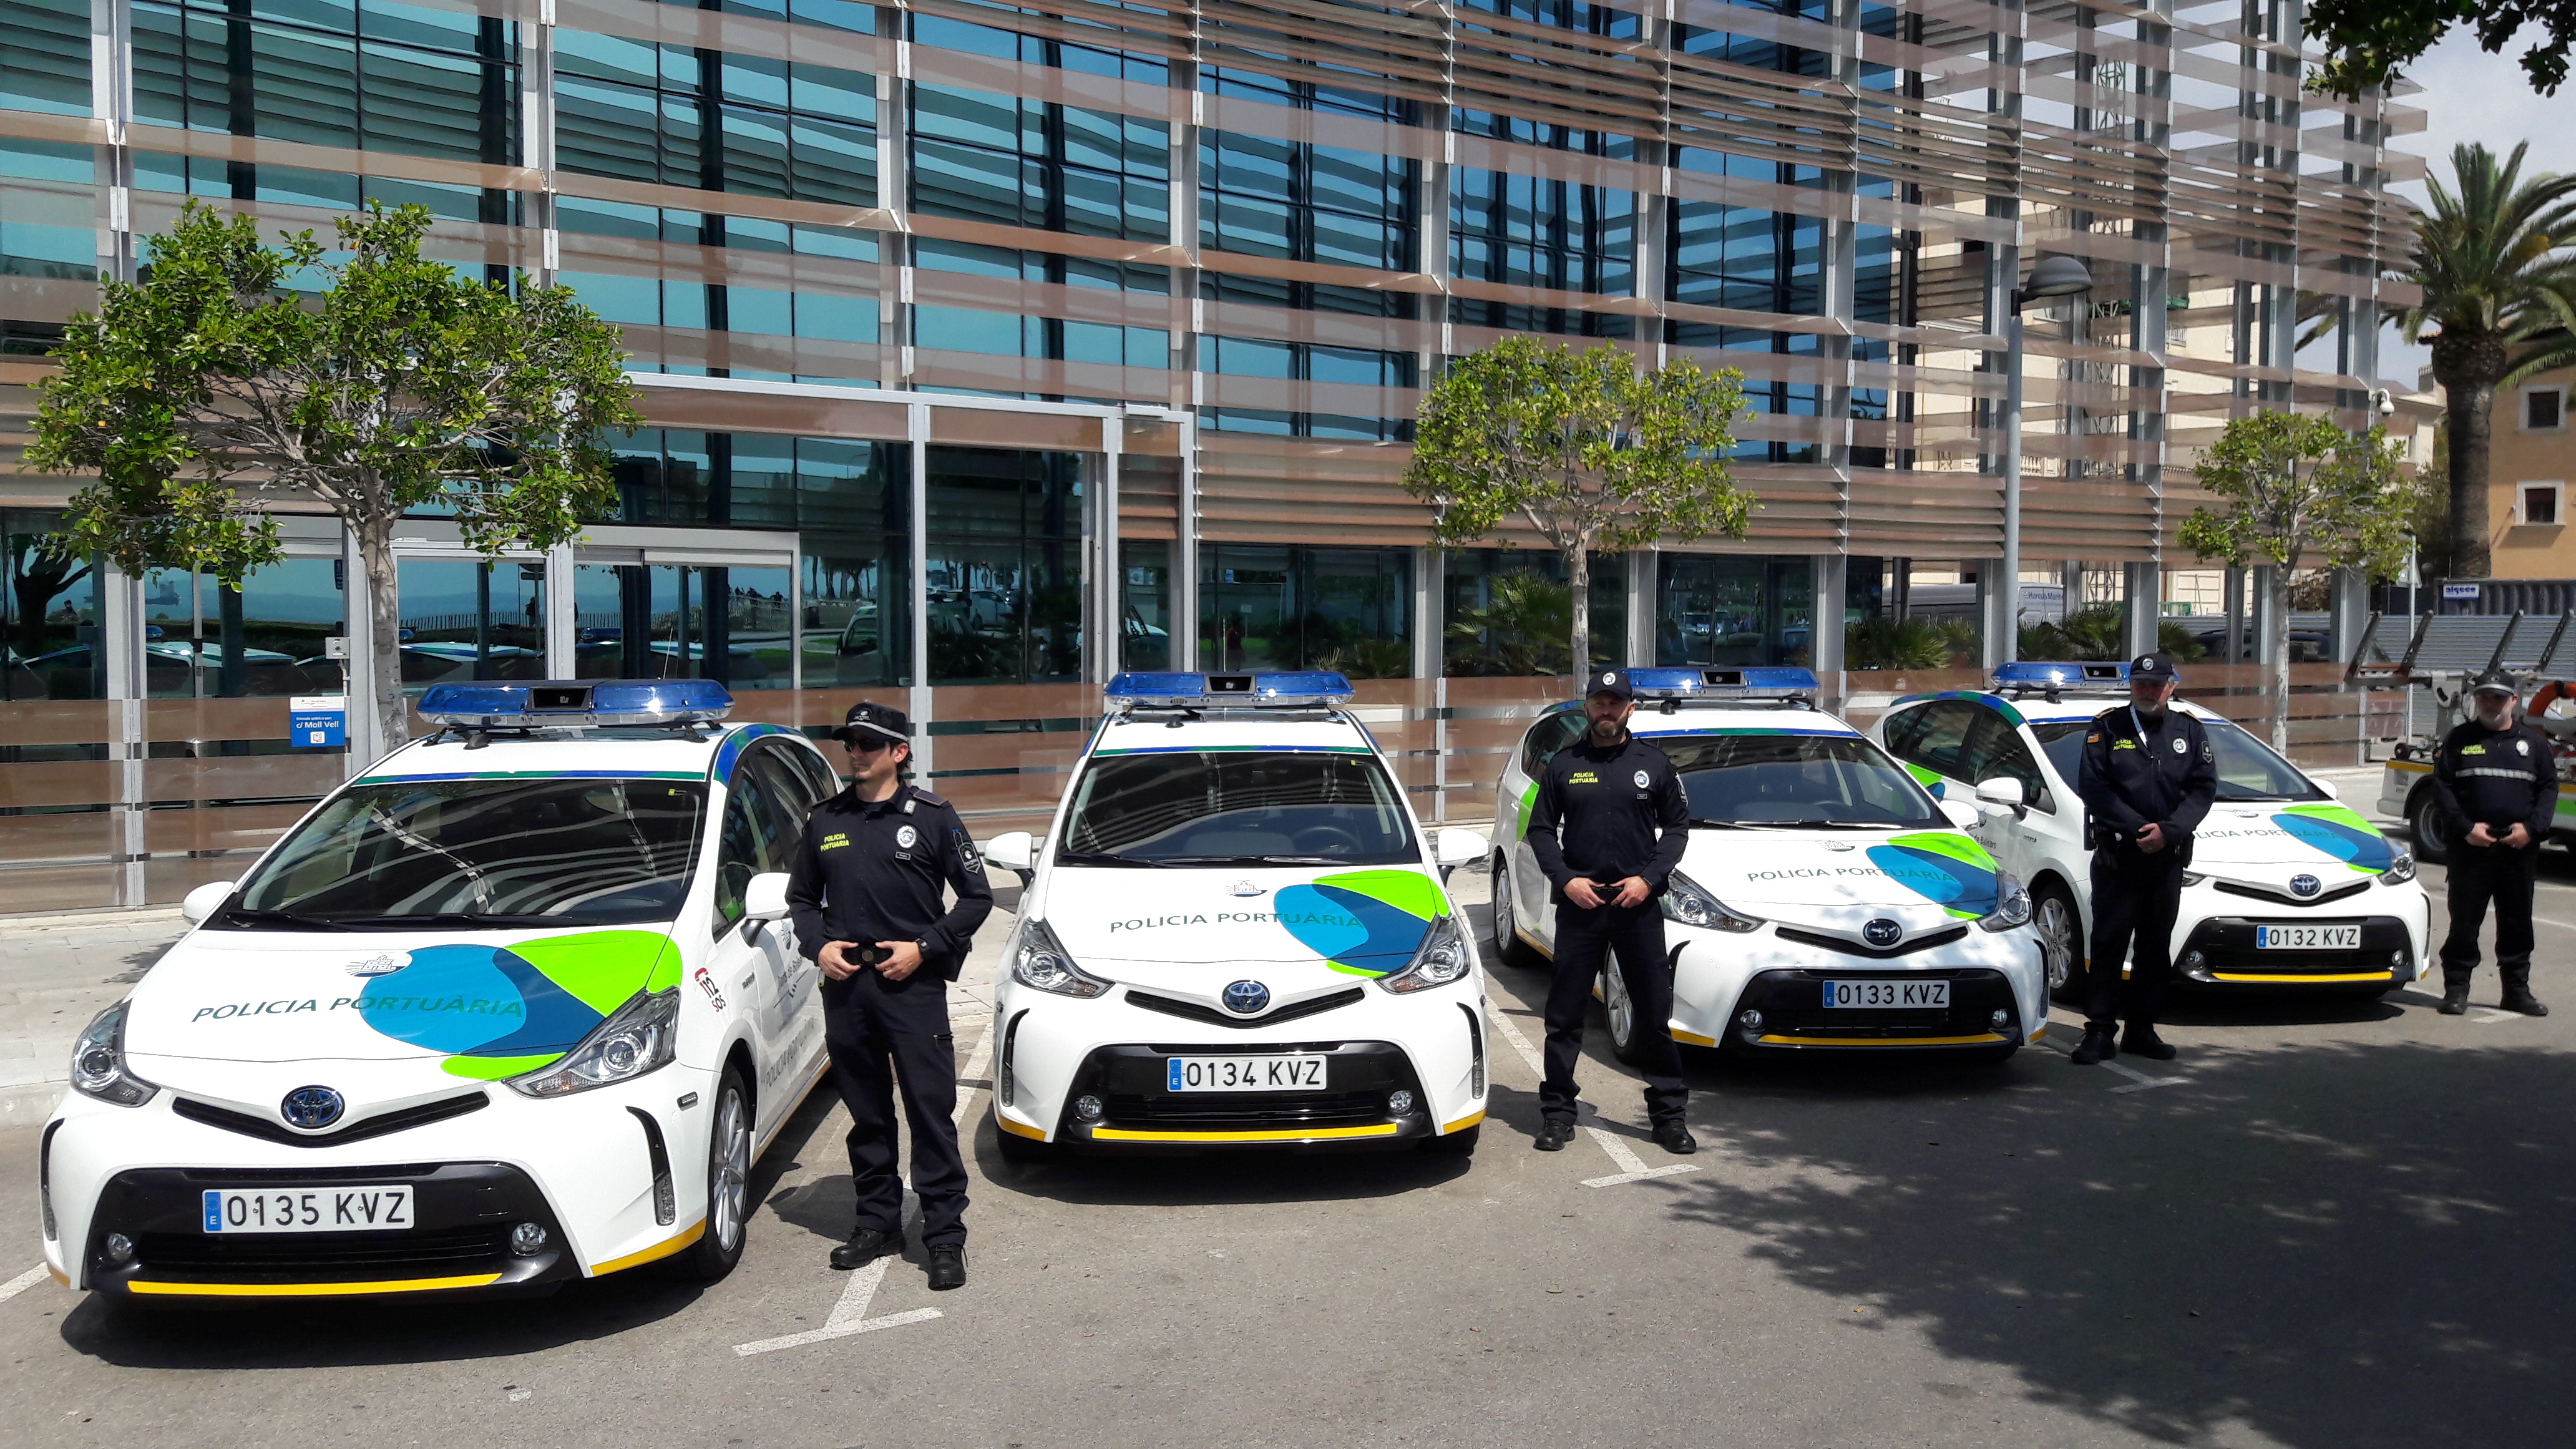 THE PORT AUTHORITY OF THE BALEARIC ISLANDS ACQUIRES FOUR NEW HYBRID VEHICLES